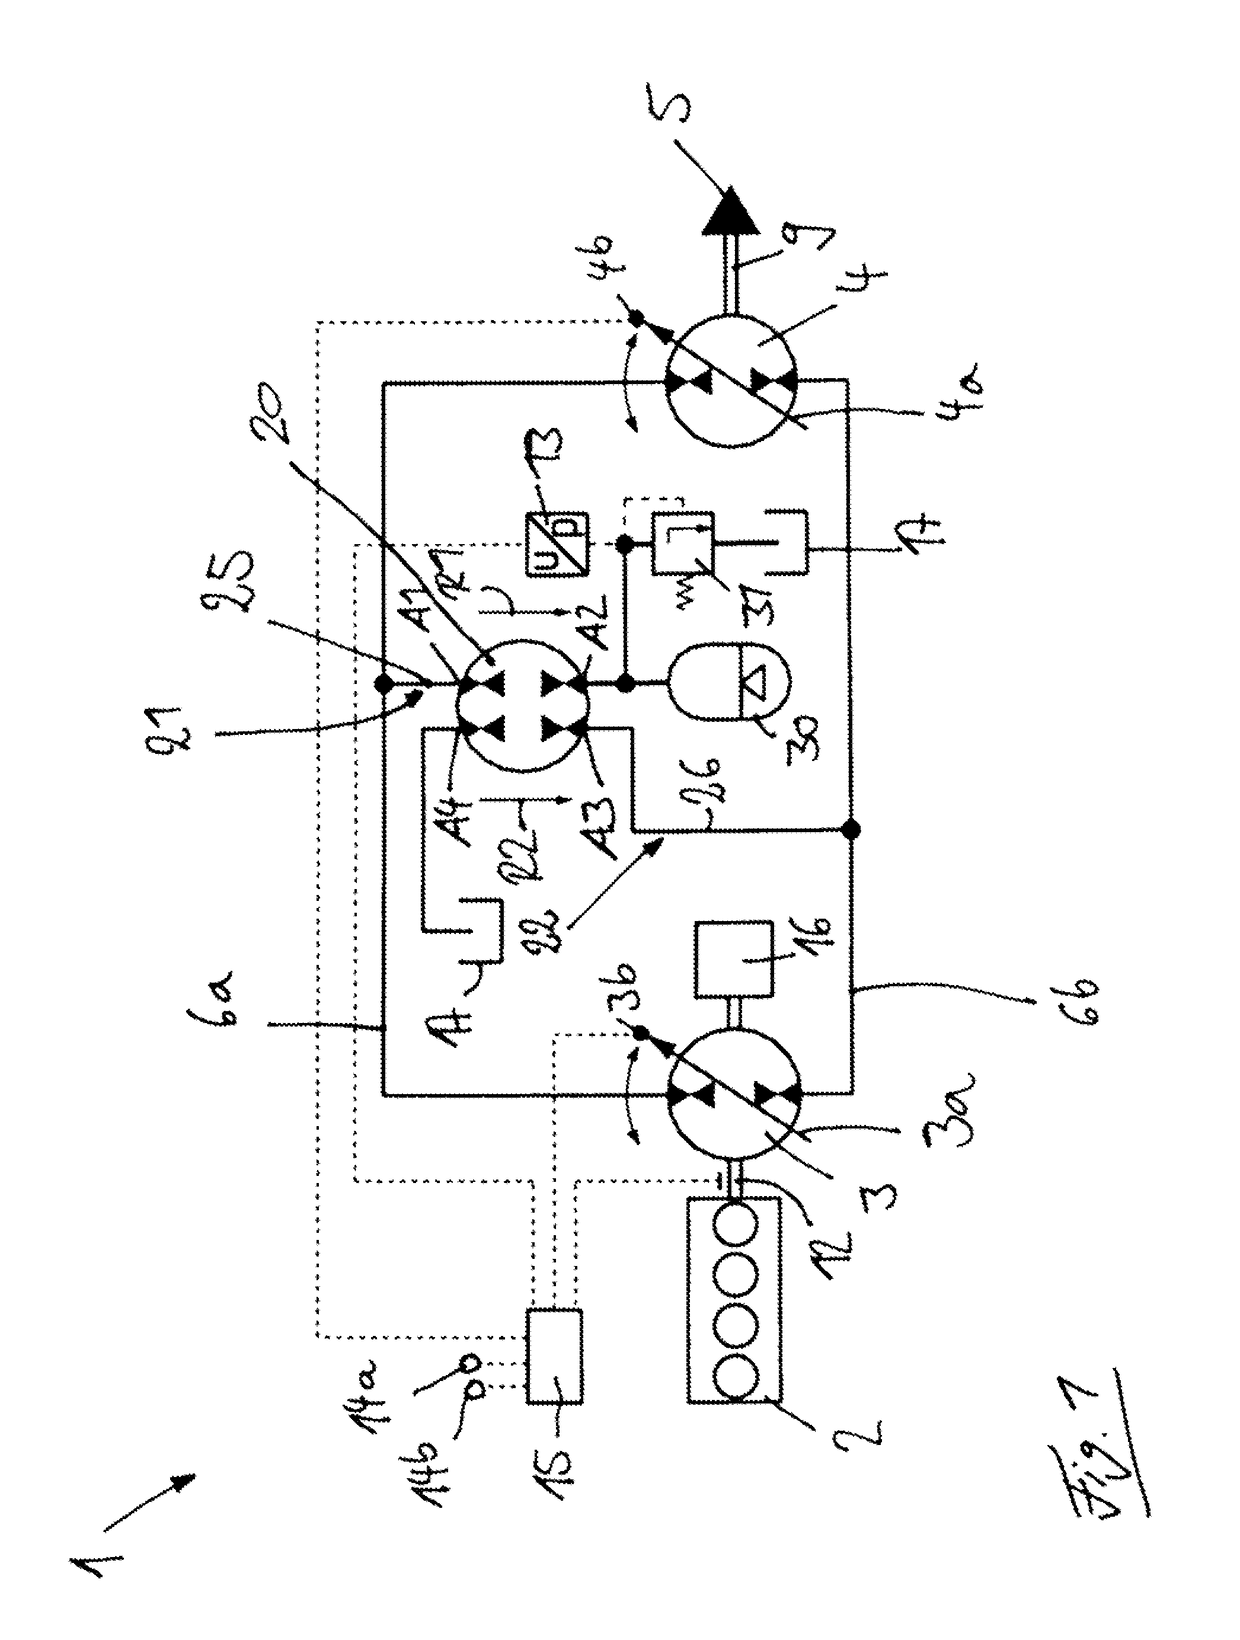 Hydrostatic drive system in a closed circuit